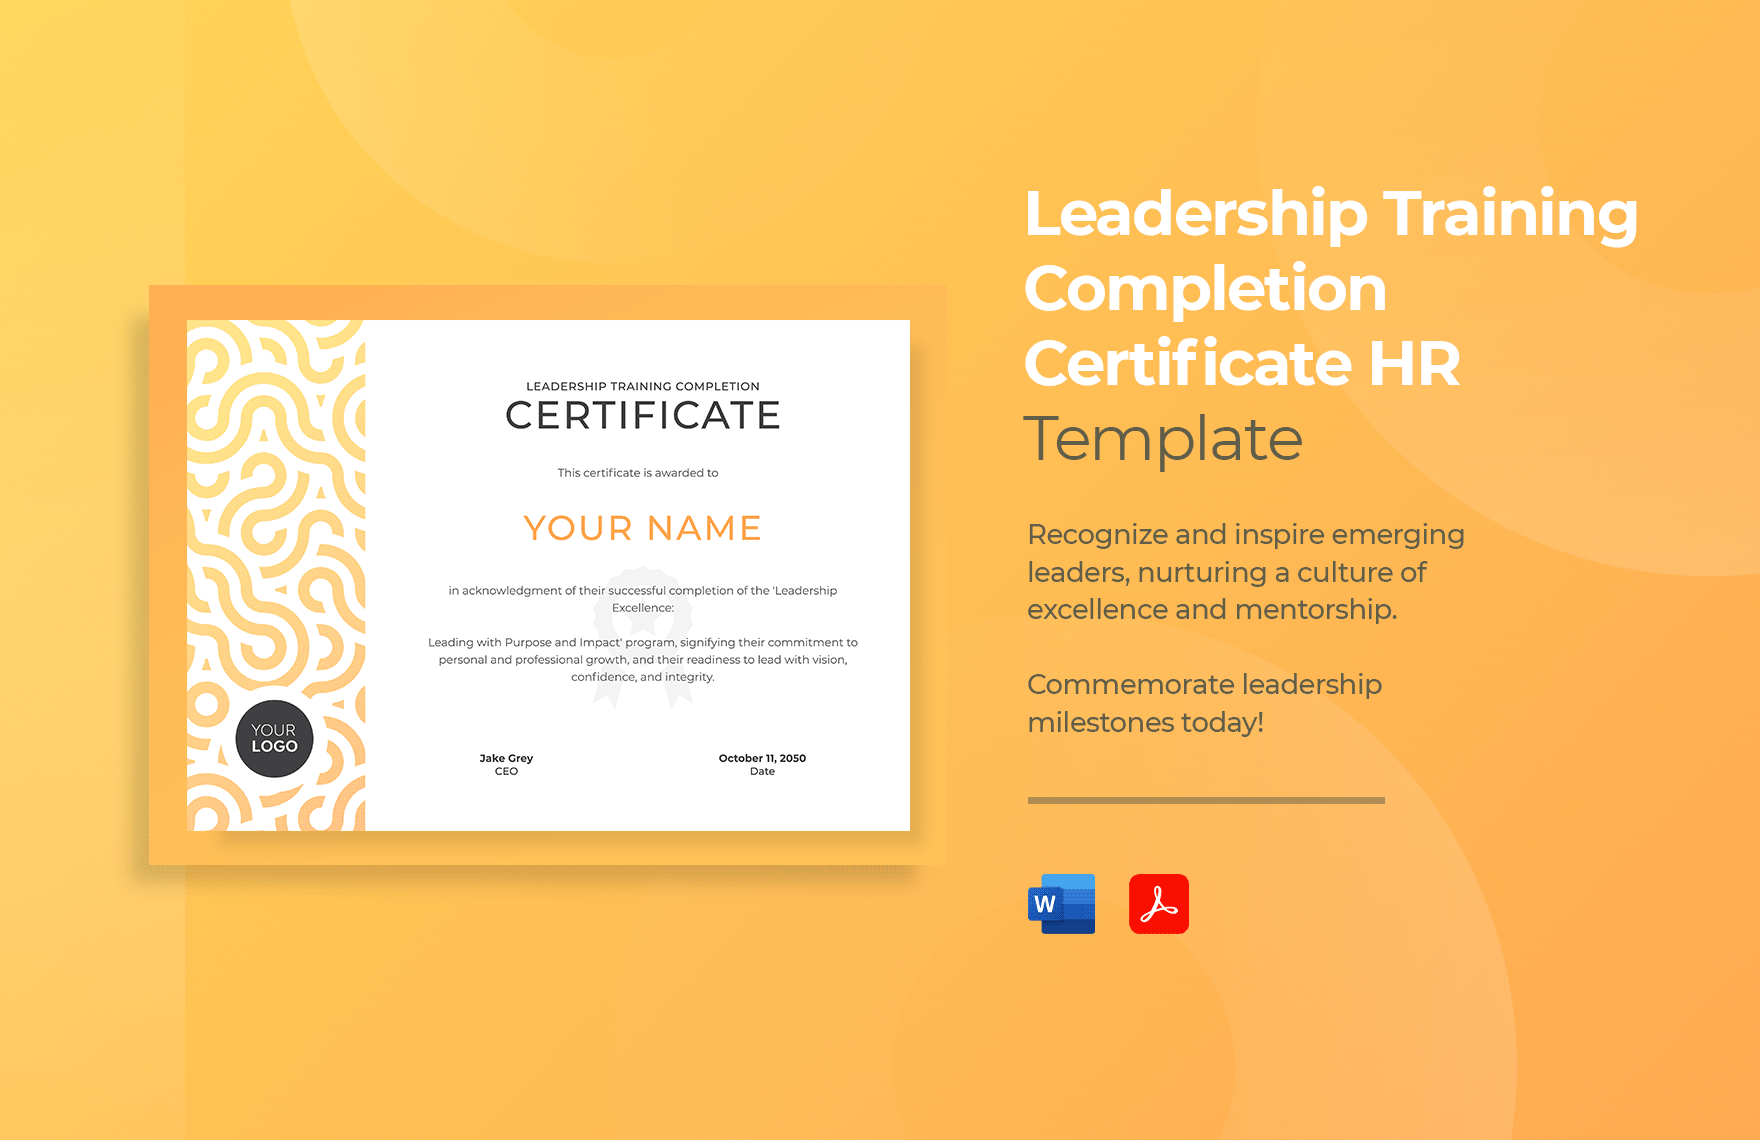 Leadership Training Completion Certificate HR Template